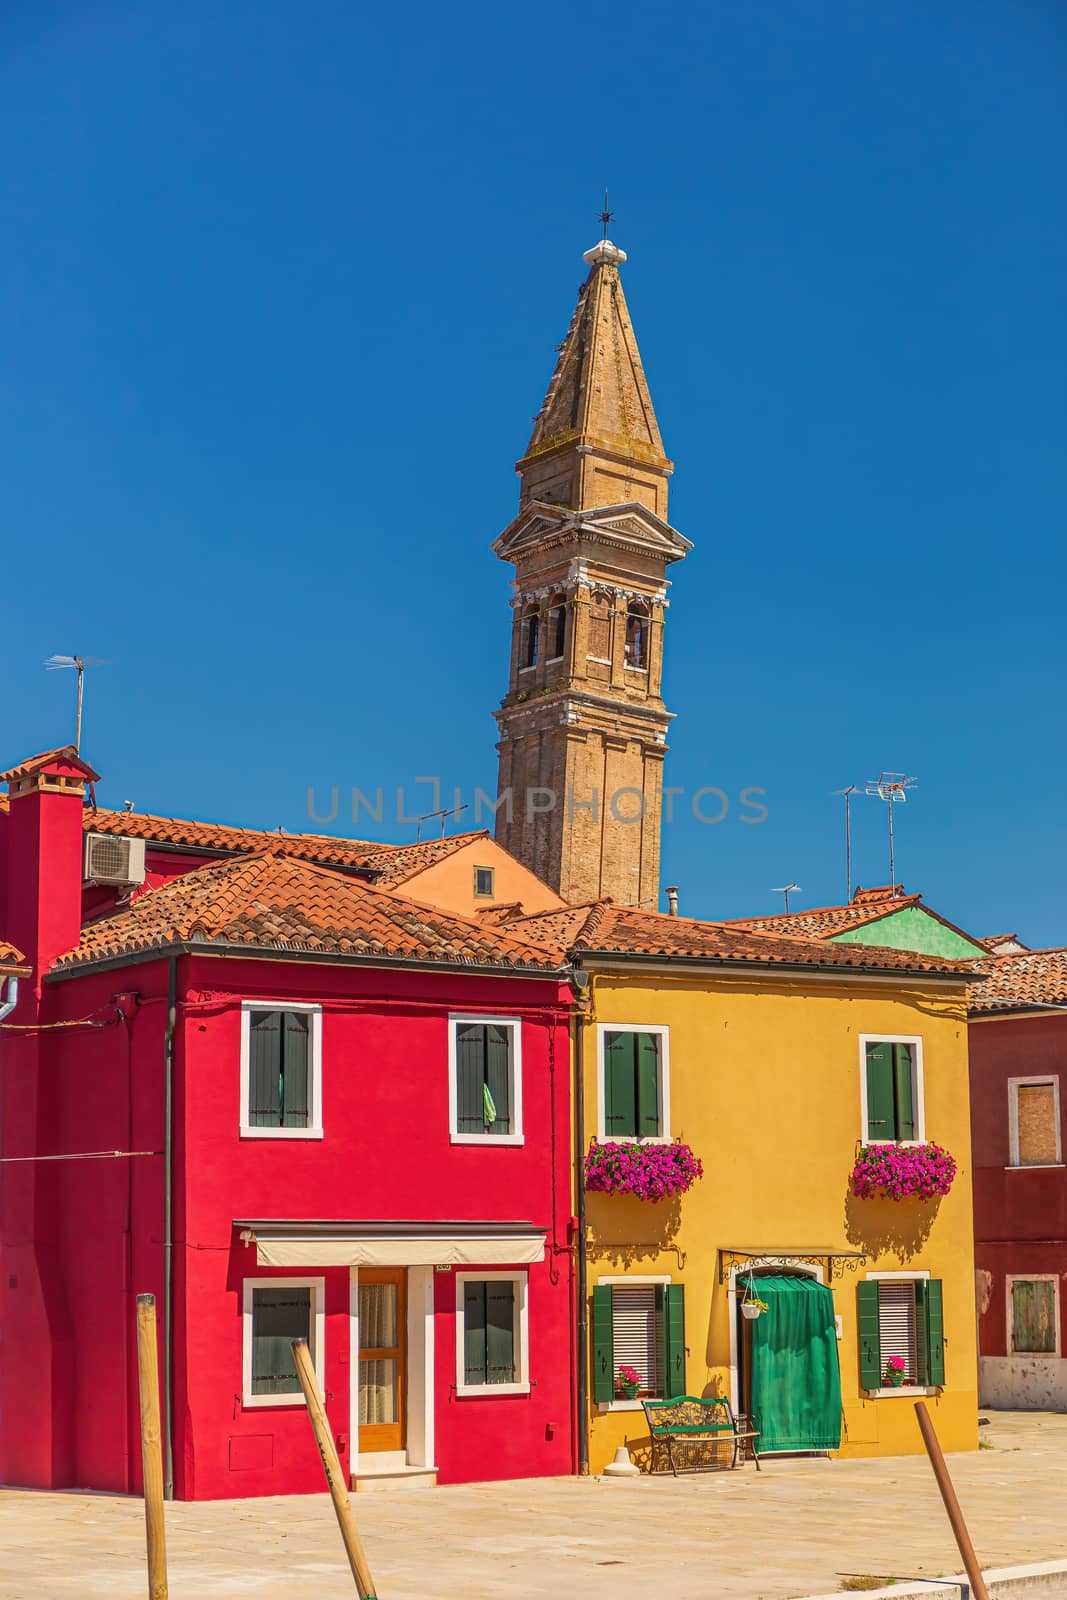 The Leaning Bell Tower on the island of Burano - Venice, Italy by COffe